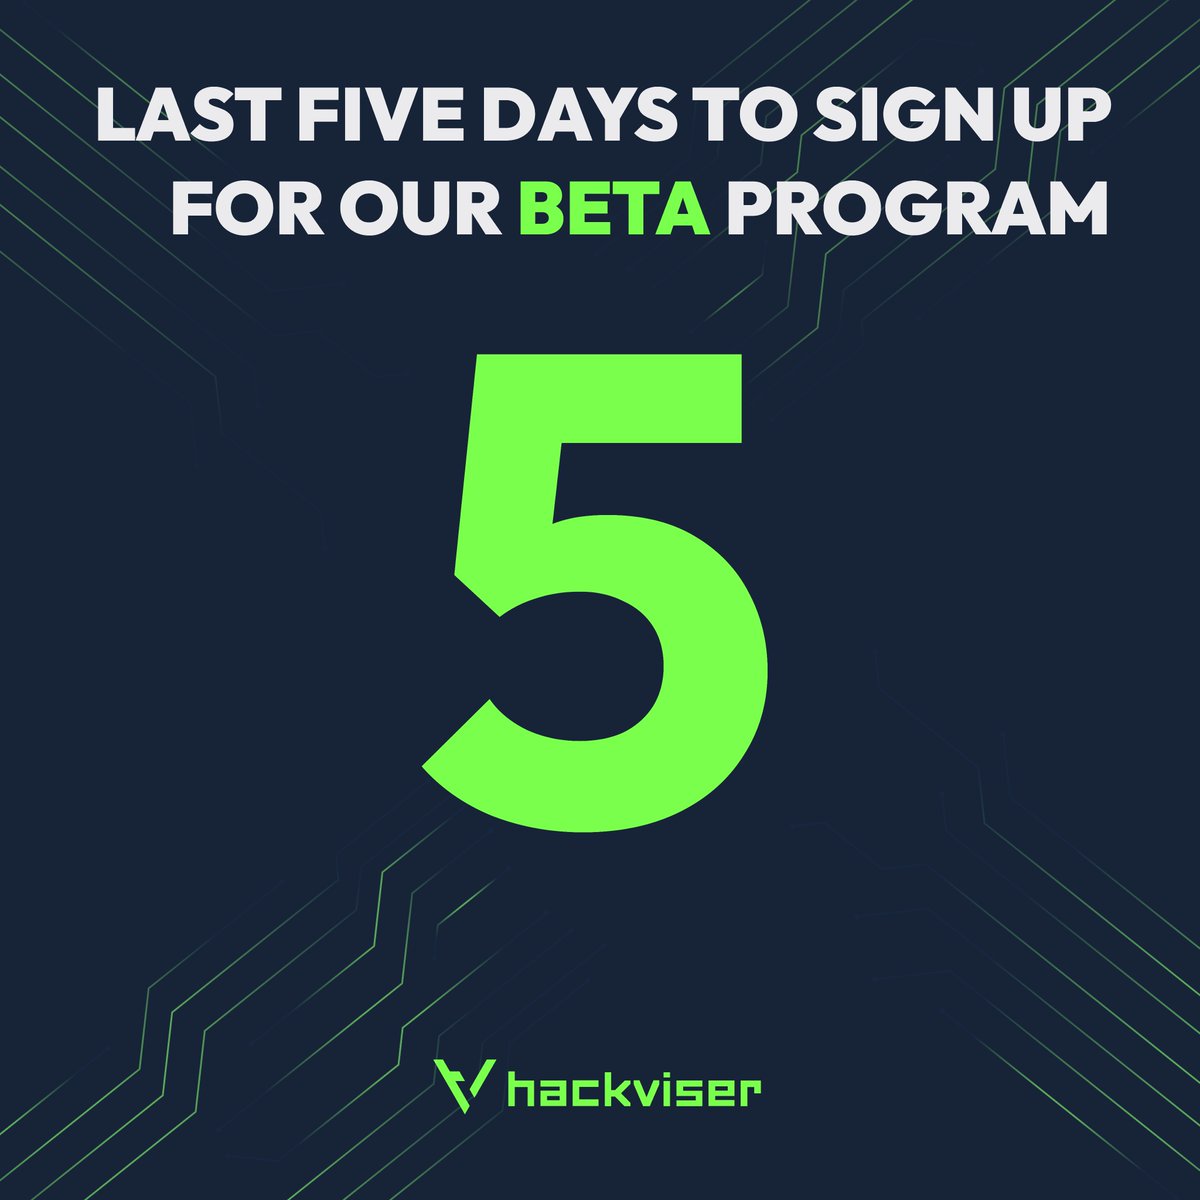 Last 5 days for closed beta applications. Applications will end at 23:59 UTC on Friday, April 12th. 

Sign up for beta now to get exclusive gifts! 
🔗 hackviser.com

#cybersecurity #cyberrange